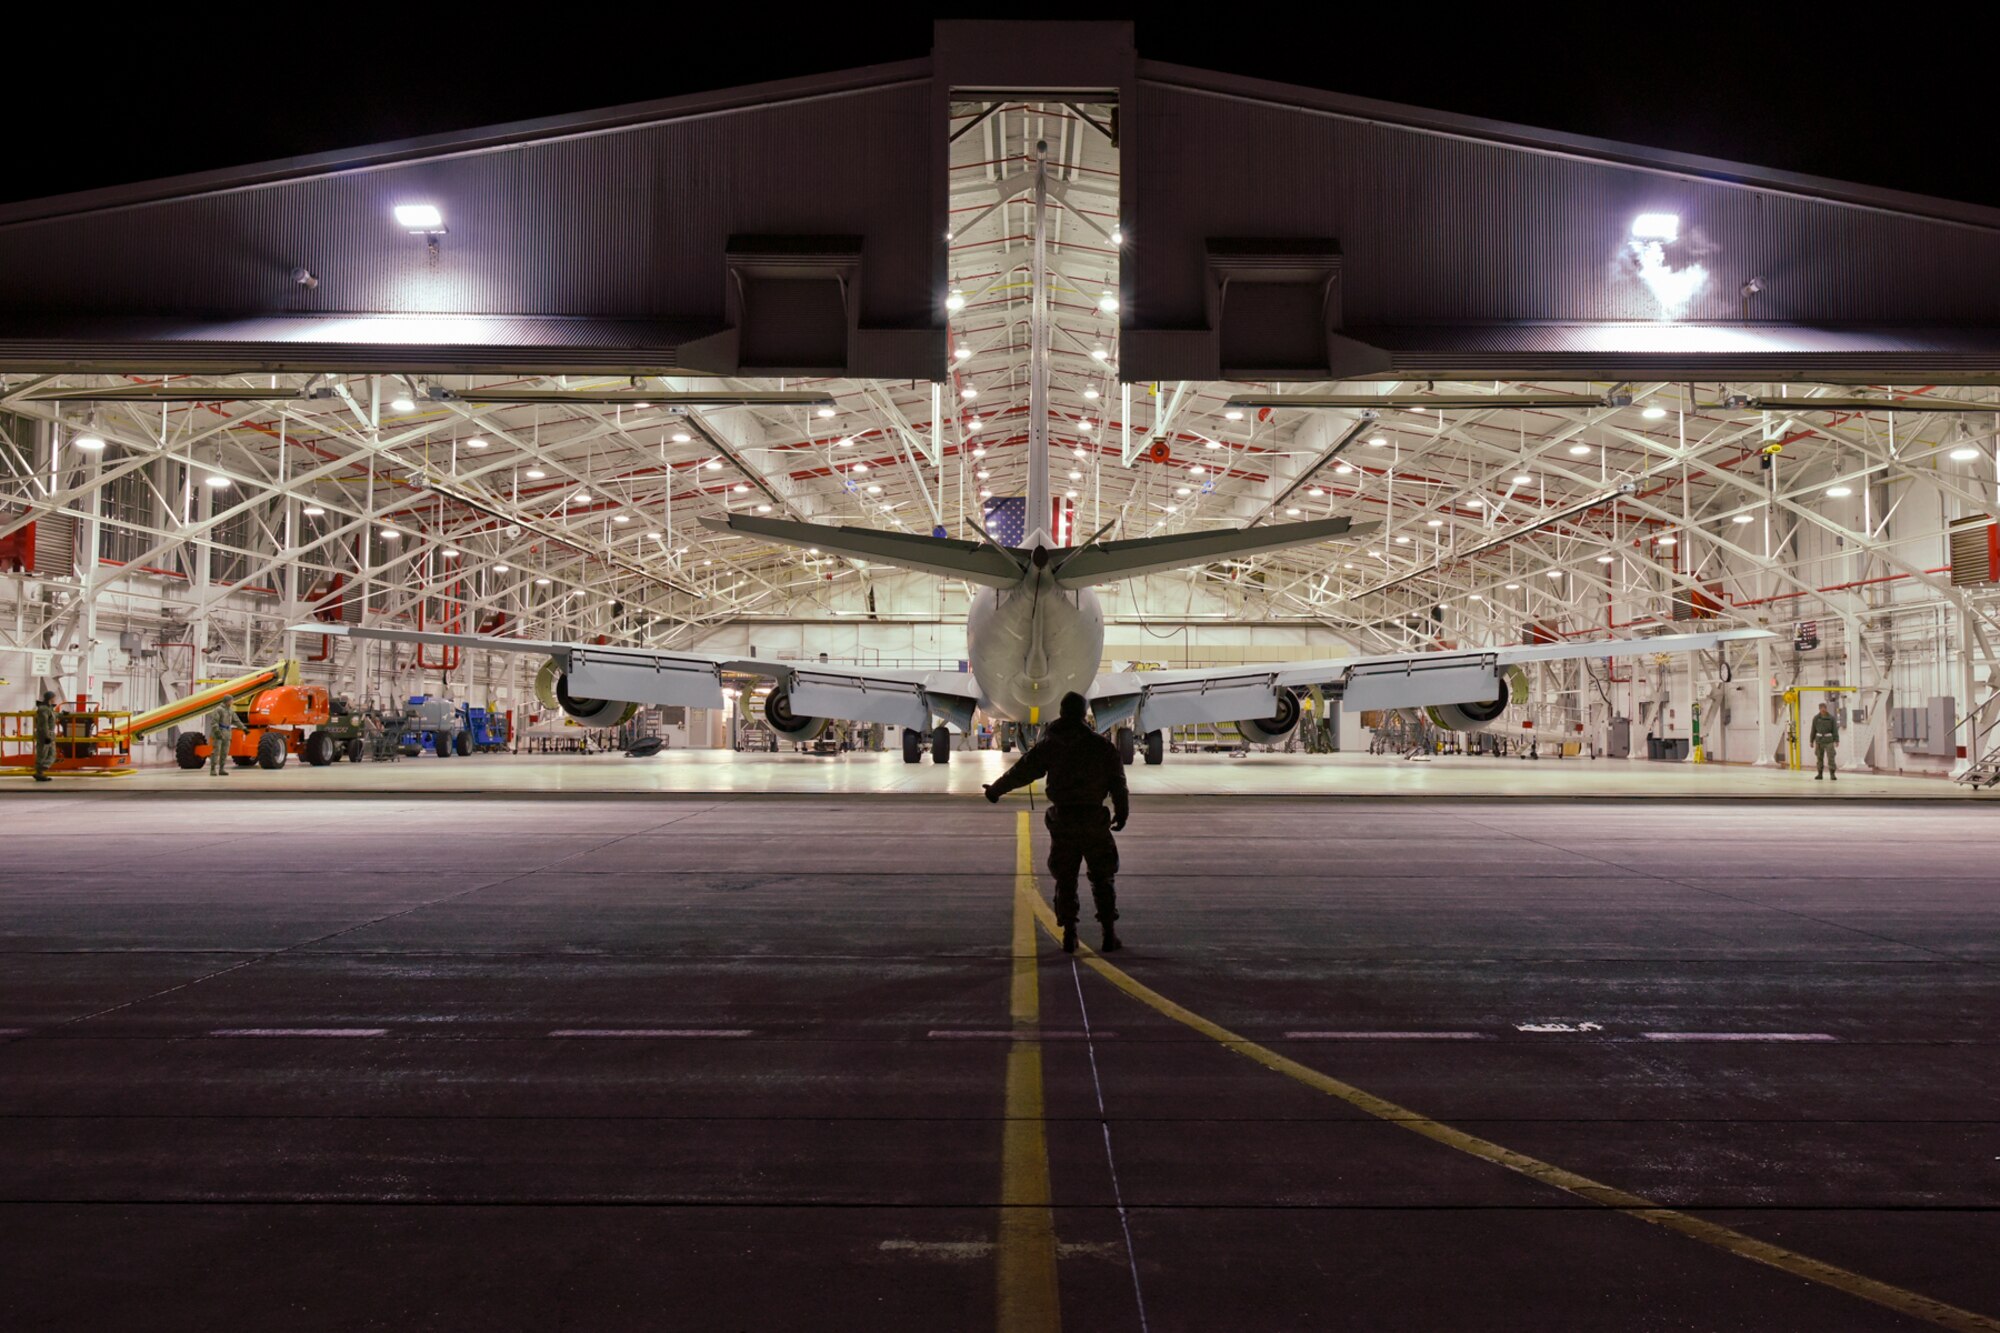 Airmen of the 191st Aircraft Maintenance Squadron begin their day by towing a KC-135 Stratotanker out of a hangar at Selfridge Air National Guard Base, Mich., in the pre-dawn hours of Dec. 19, 2014. Each aircraft undergoes a complete inspection, known as an ISO or isochronical inspection, at various points in the aircraft’s operational cycle. (U.S. Air National Guard photo by Terry Atwell)